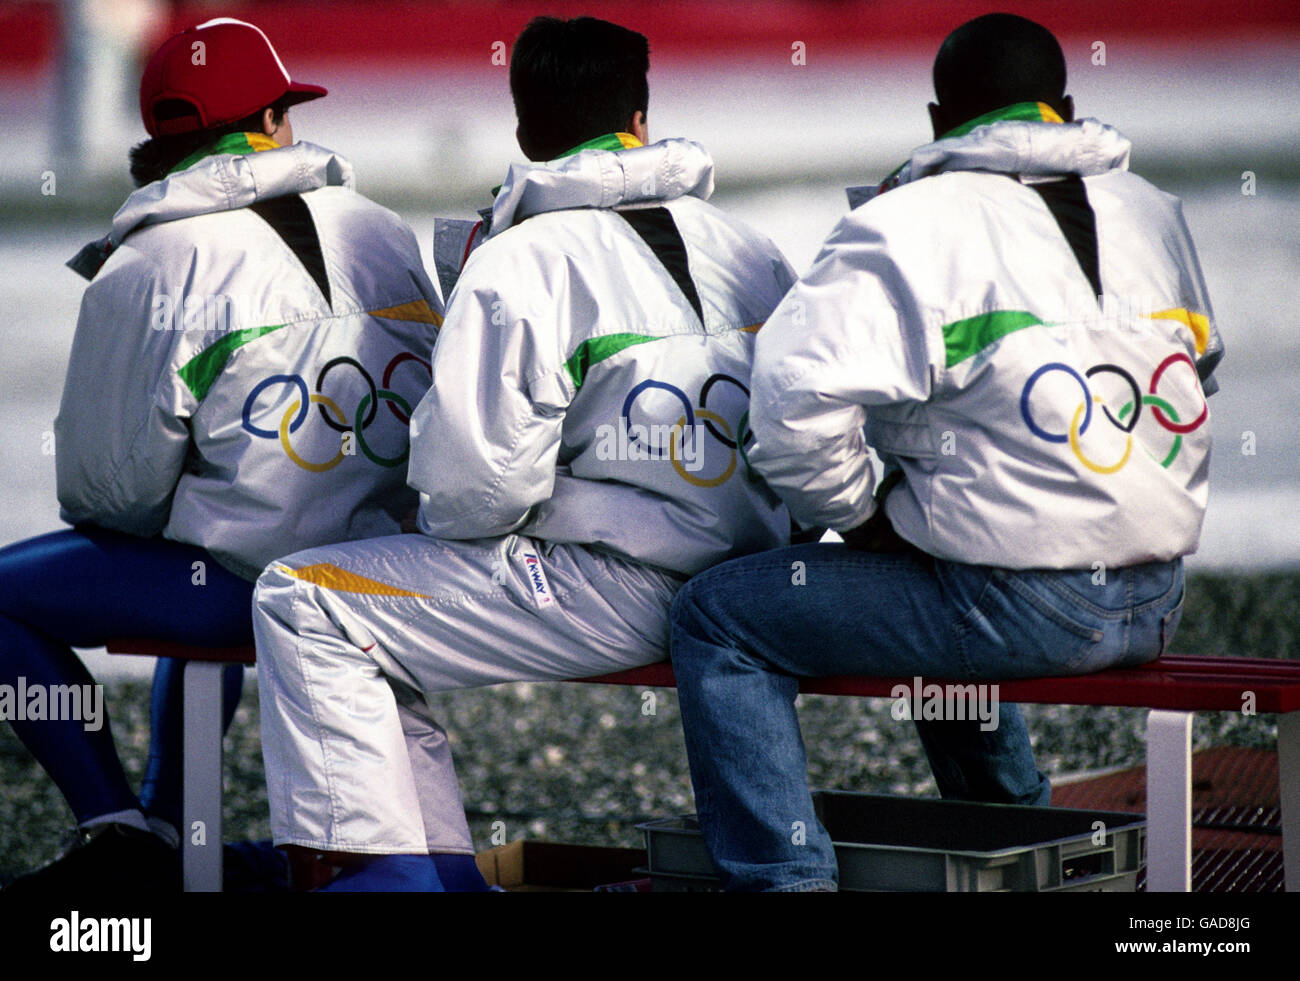 Fans watch the action wearing official Olympic coats. Stock Photo